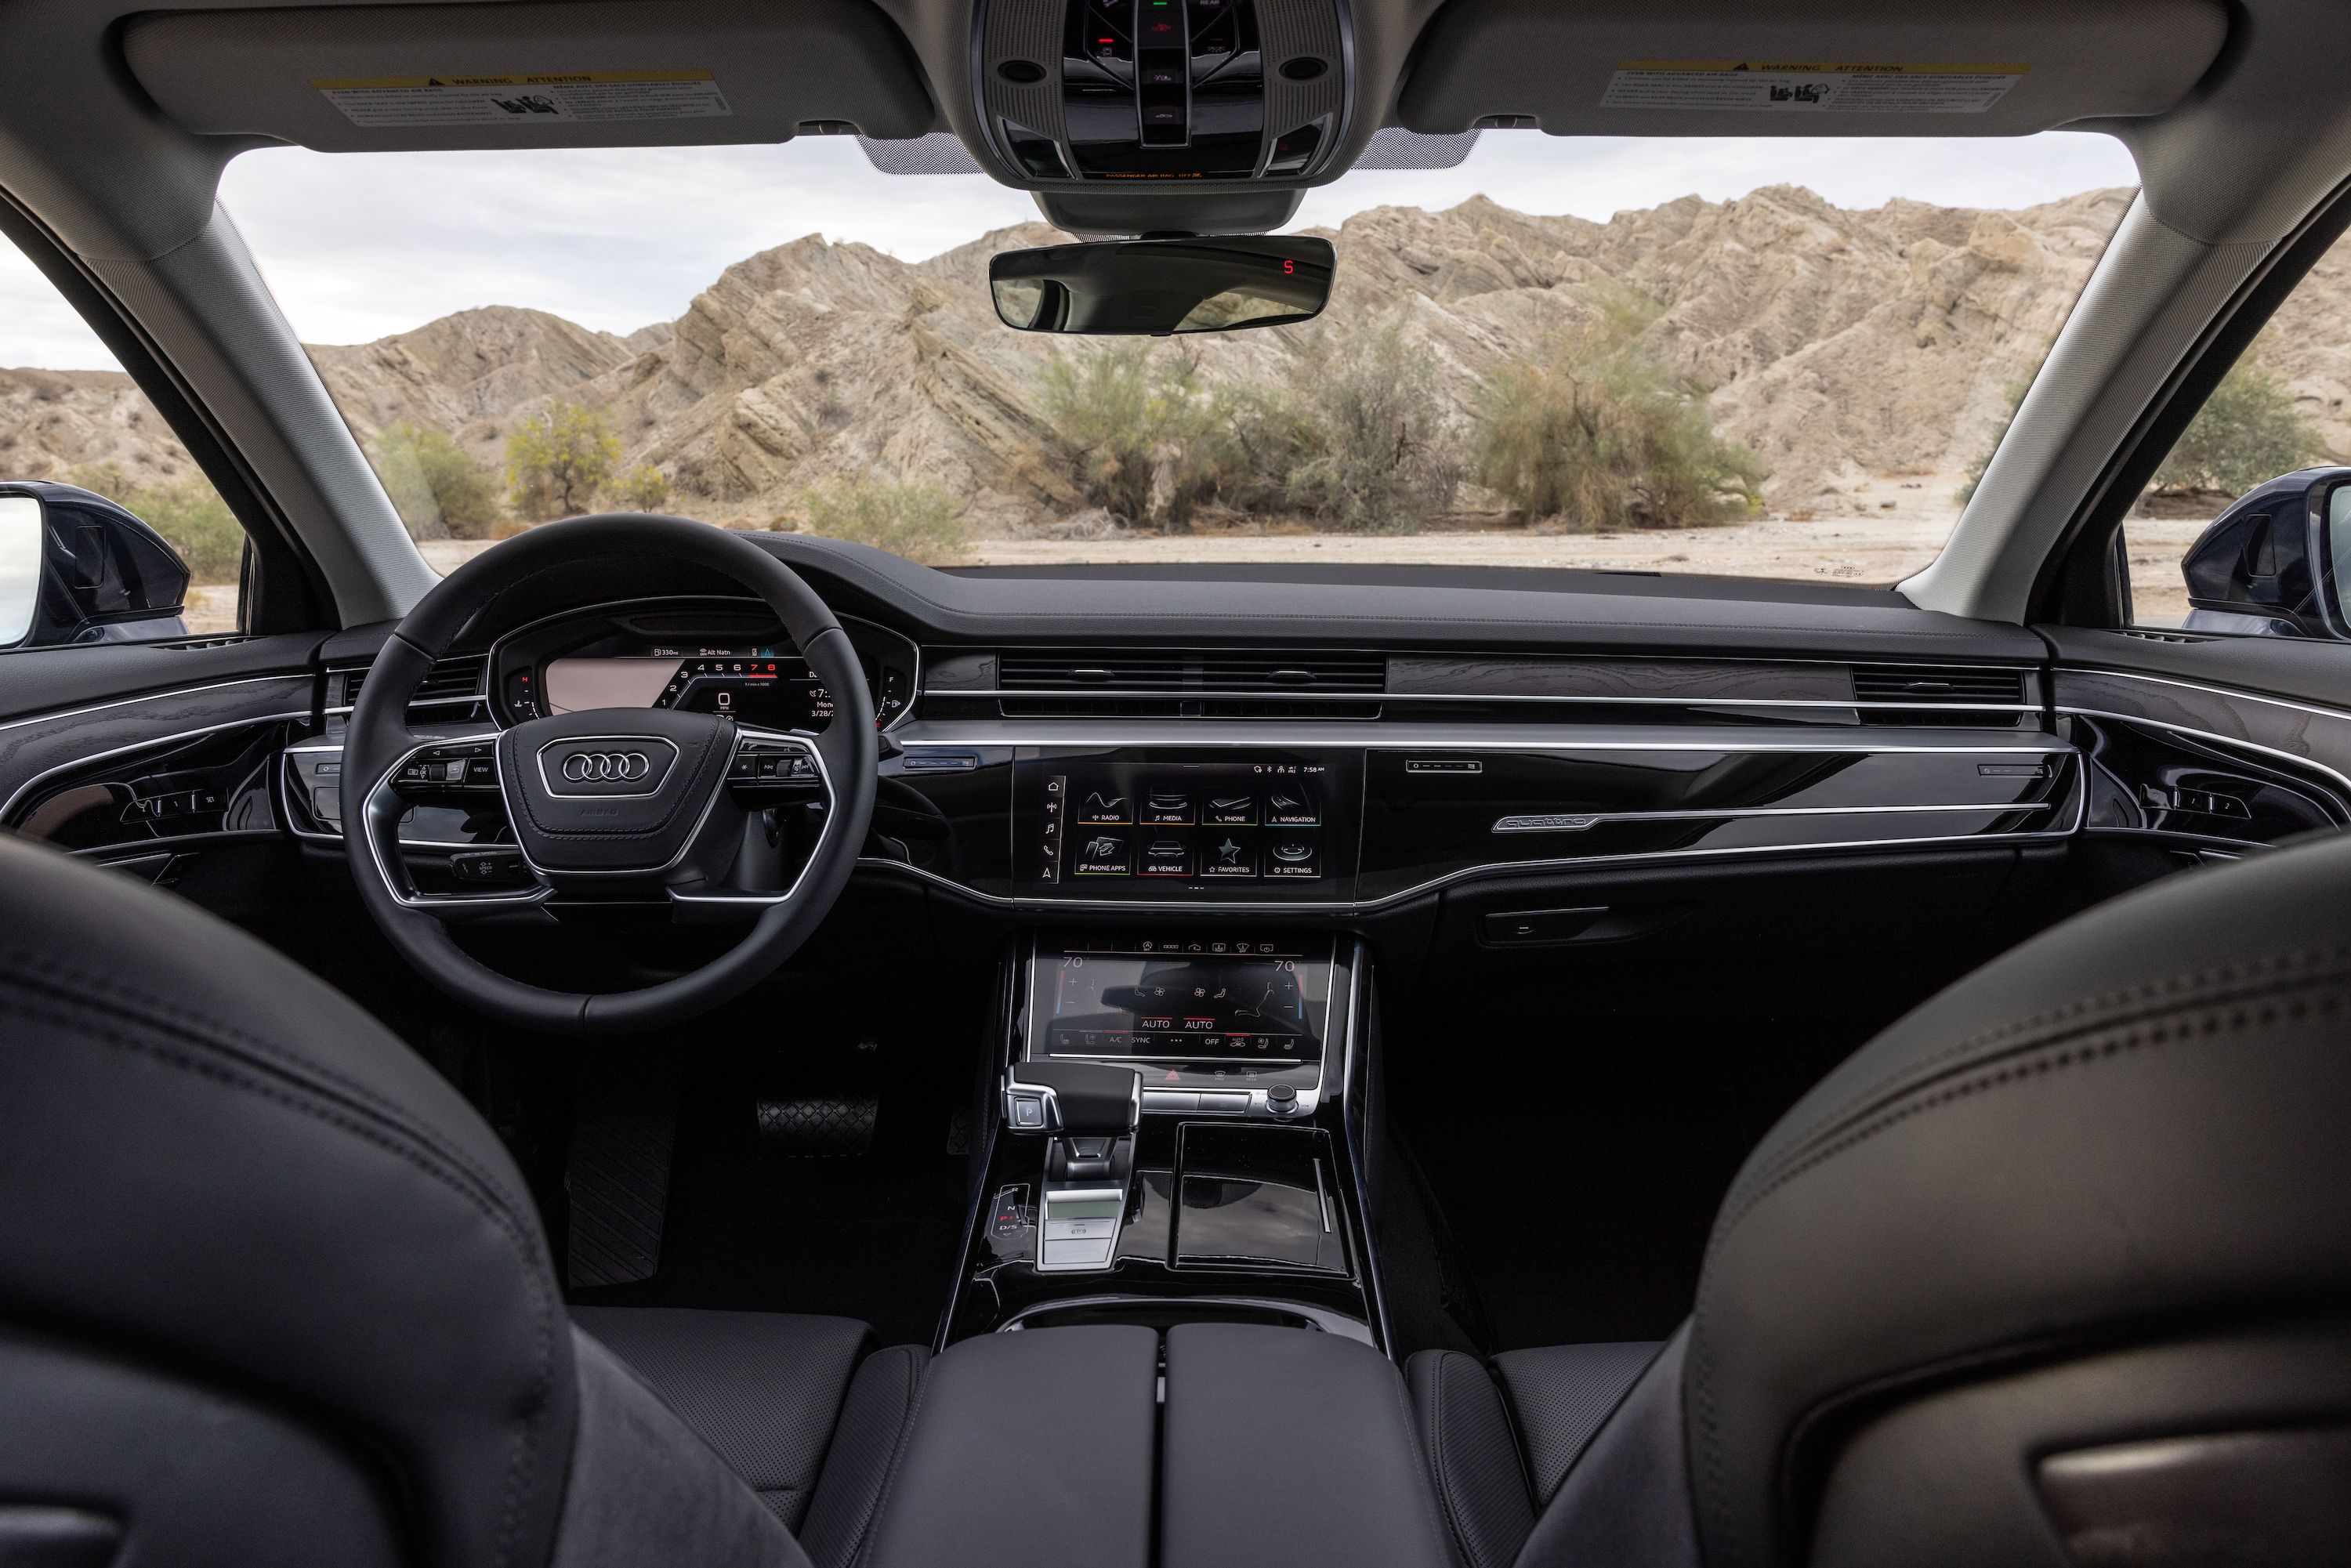 2014 Audi A8 Prices, Reviews, and Photos - MotorTrend